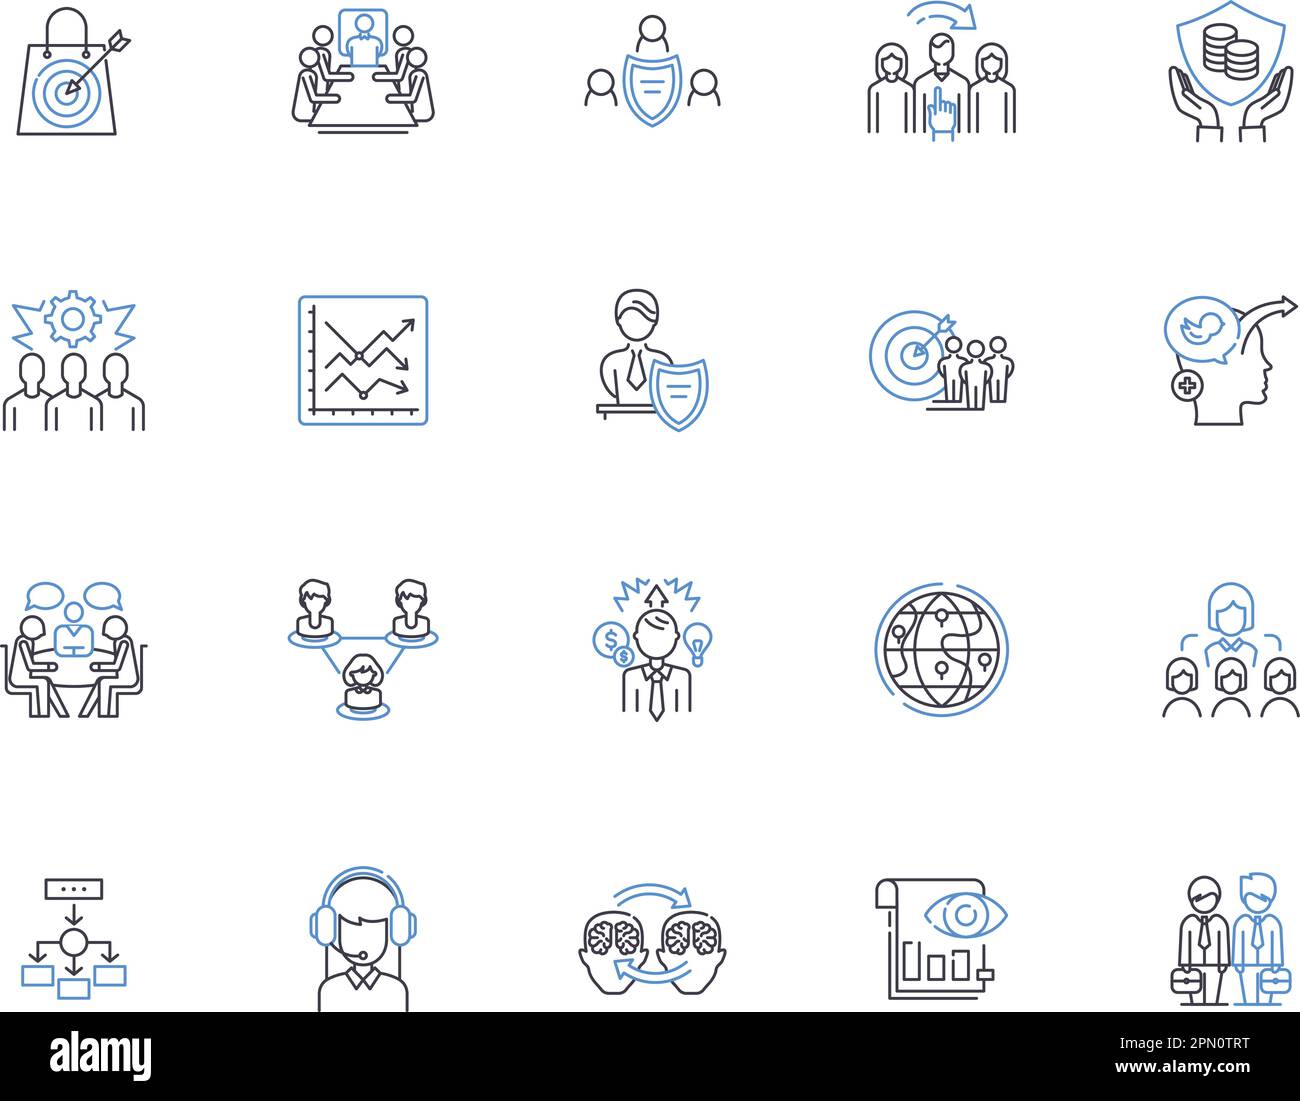 Manager outline icons collection. Supervisor, Leader, Administrator, Director, Organizer, Strategist, Advisor vector and illustration concept set Stock Vector